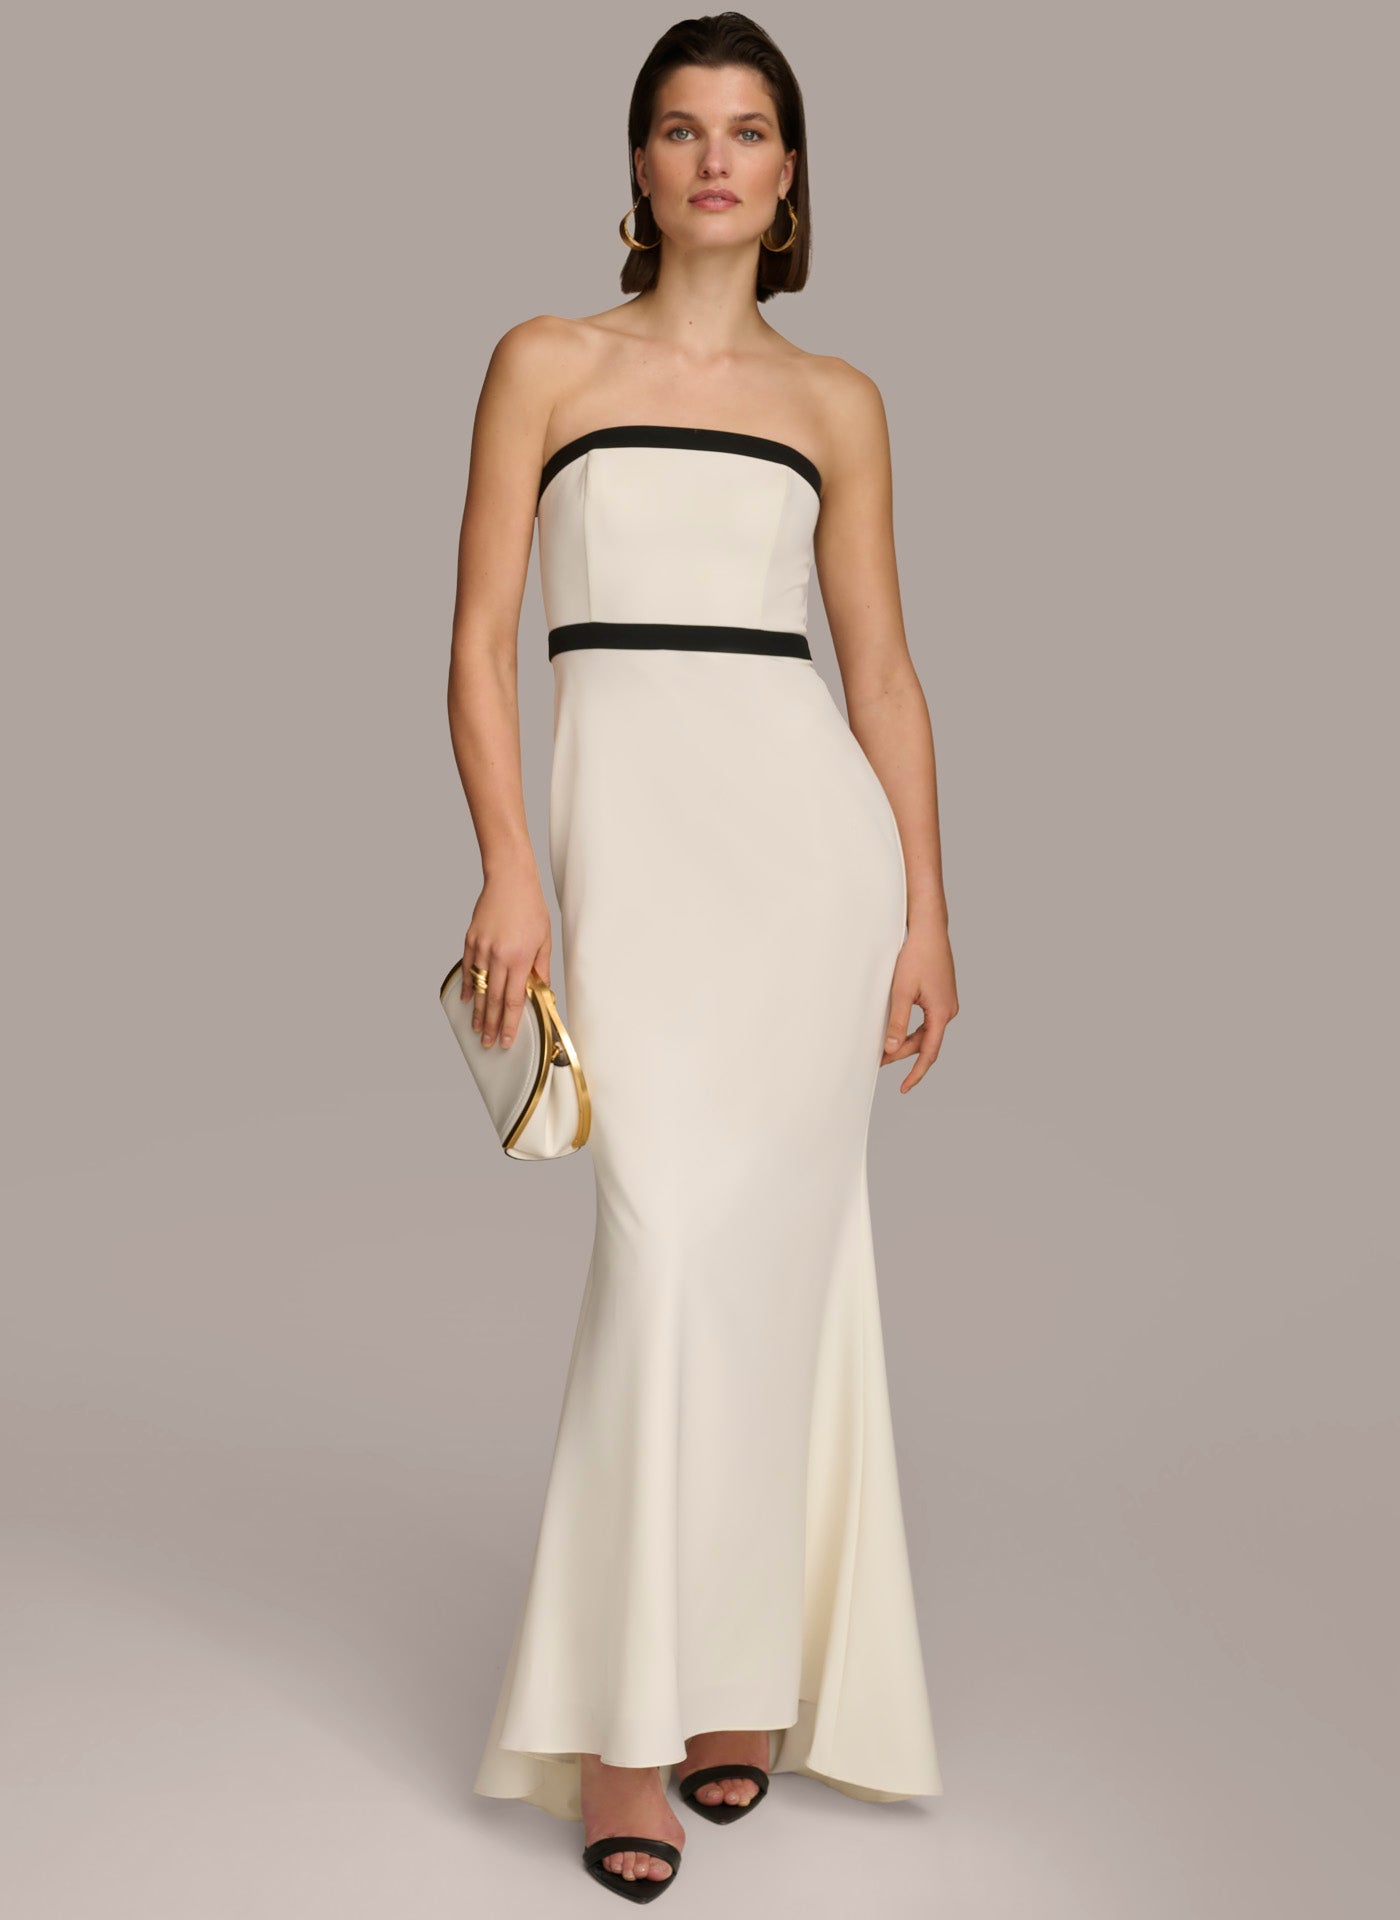 CONTRAST TRIM STRAPLESS GOWN